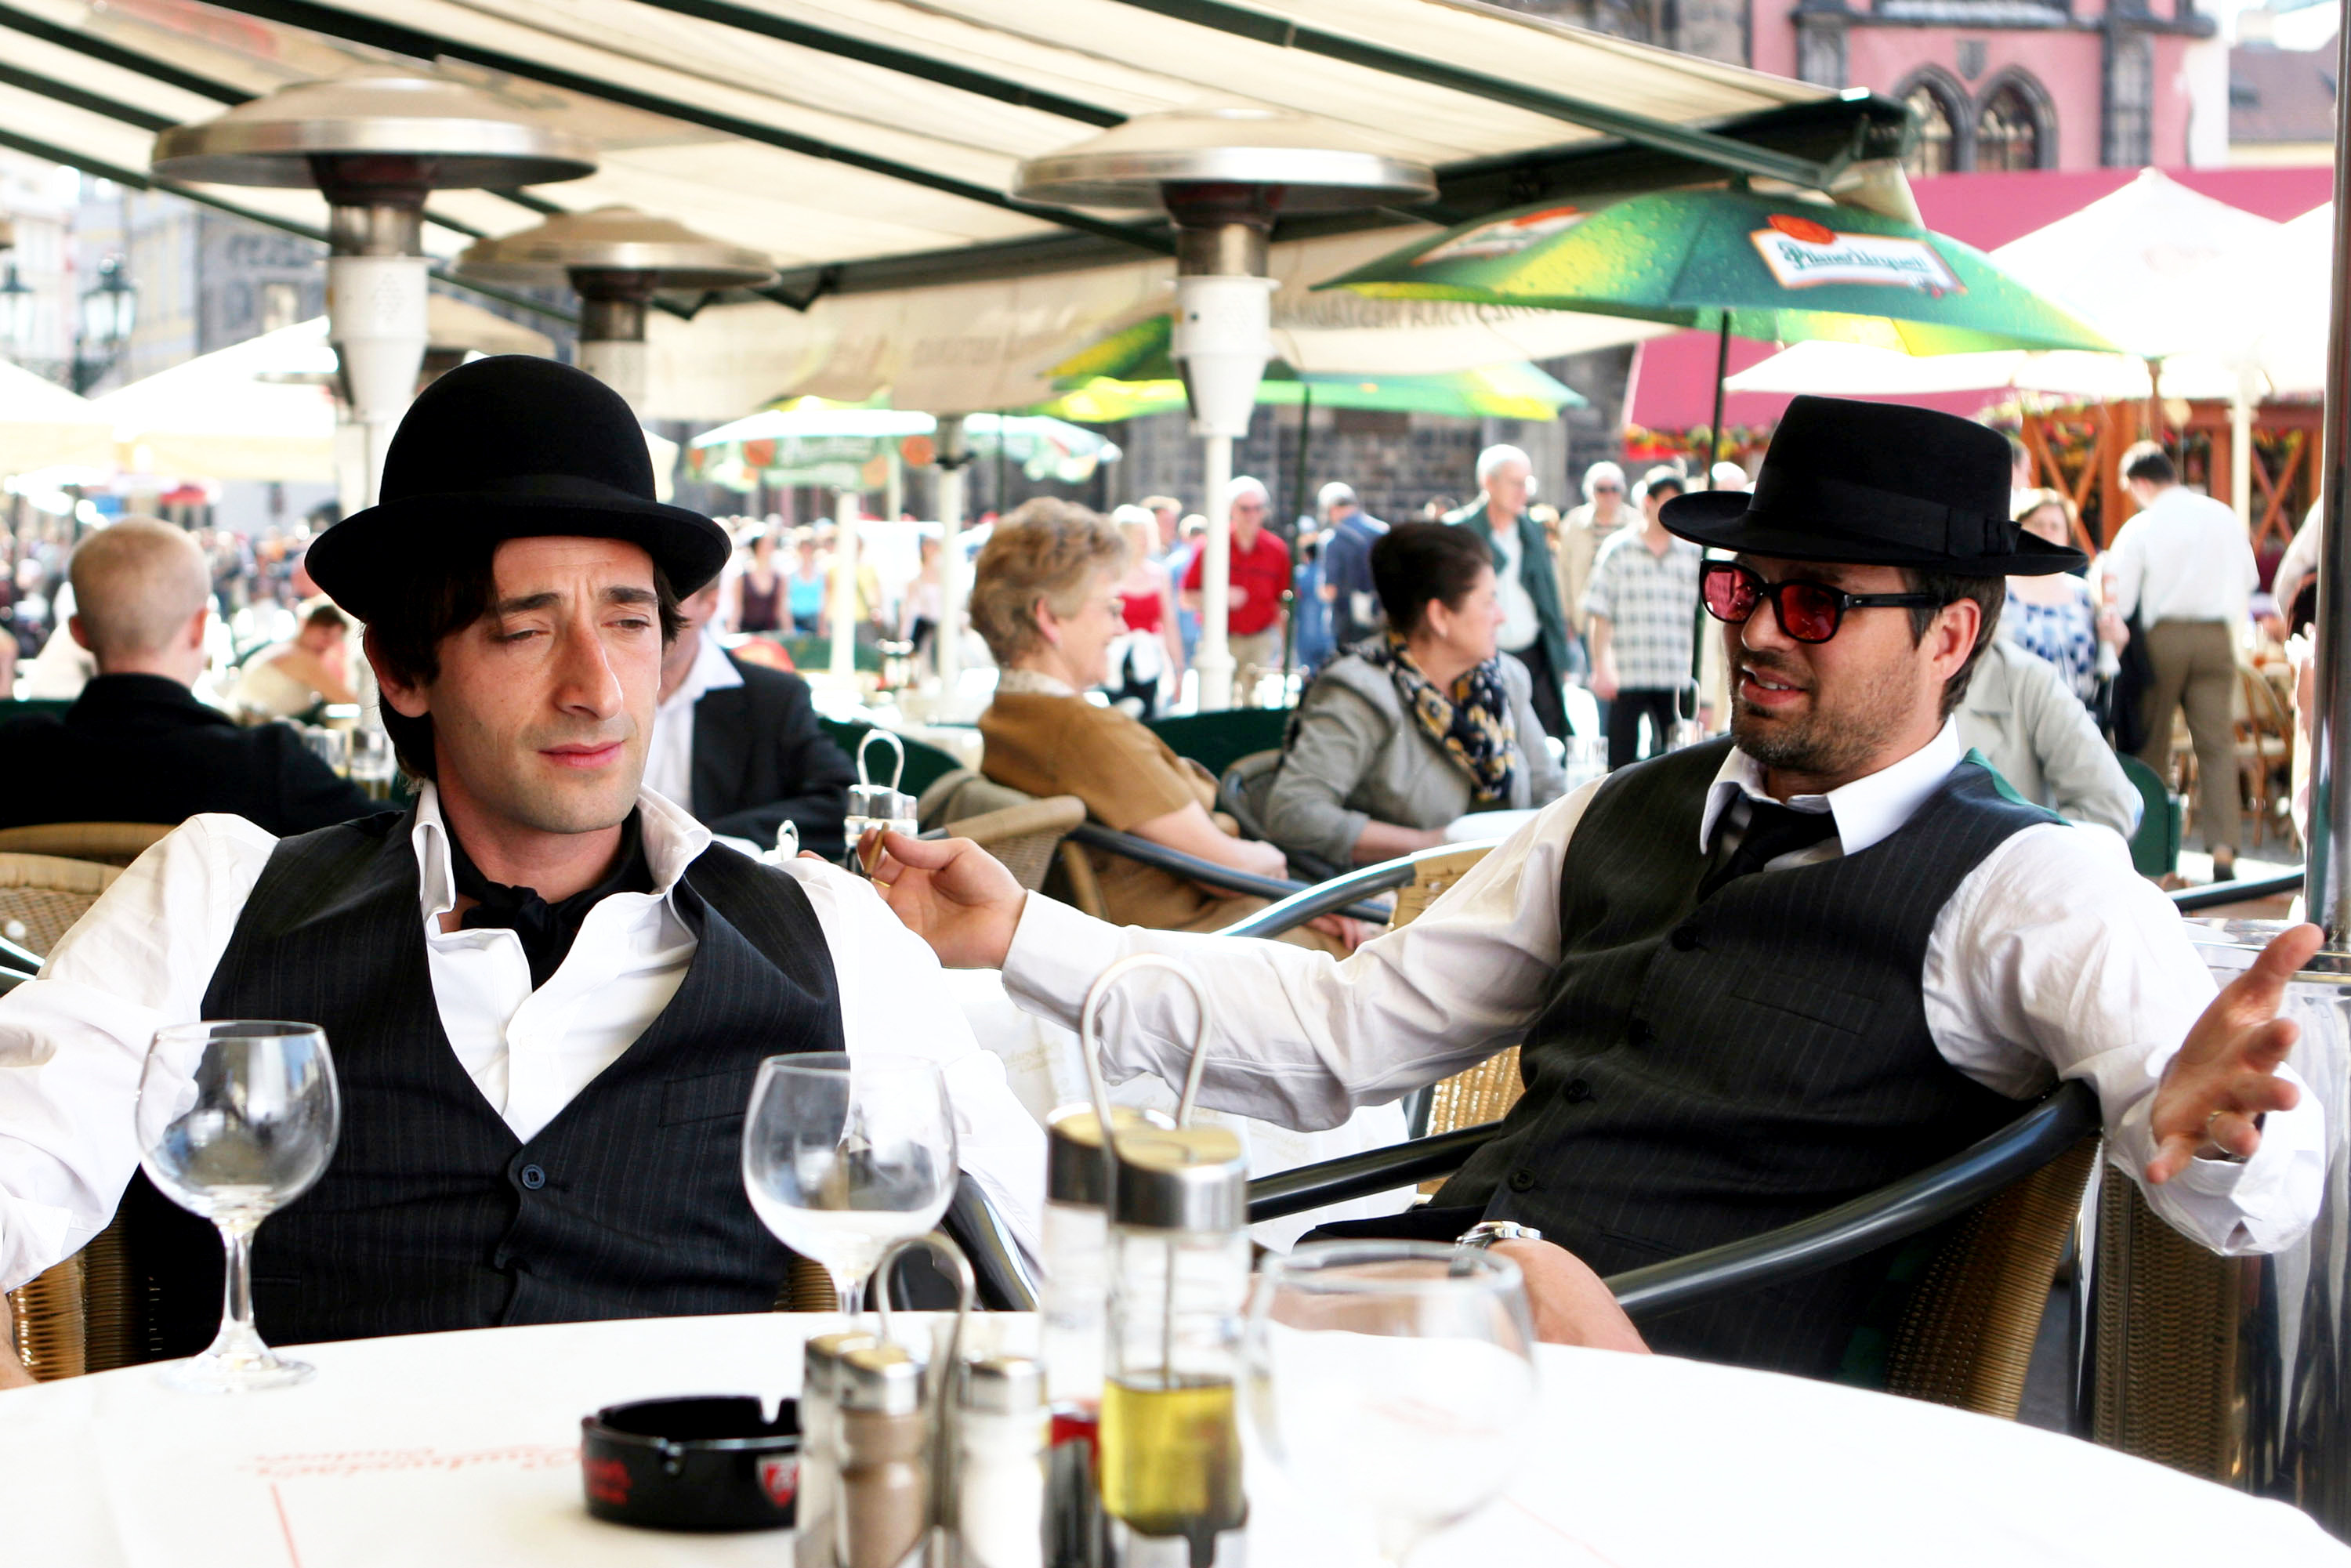 Adrien Brody stars as Bloom and Mark Ruffalo stars as Stephen in Summit Entertainment's The Brothers Bloom (2009)